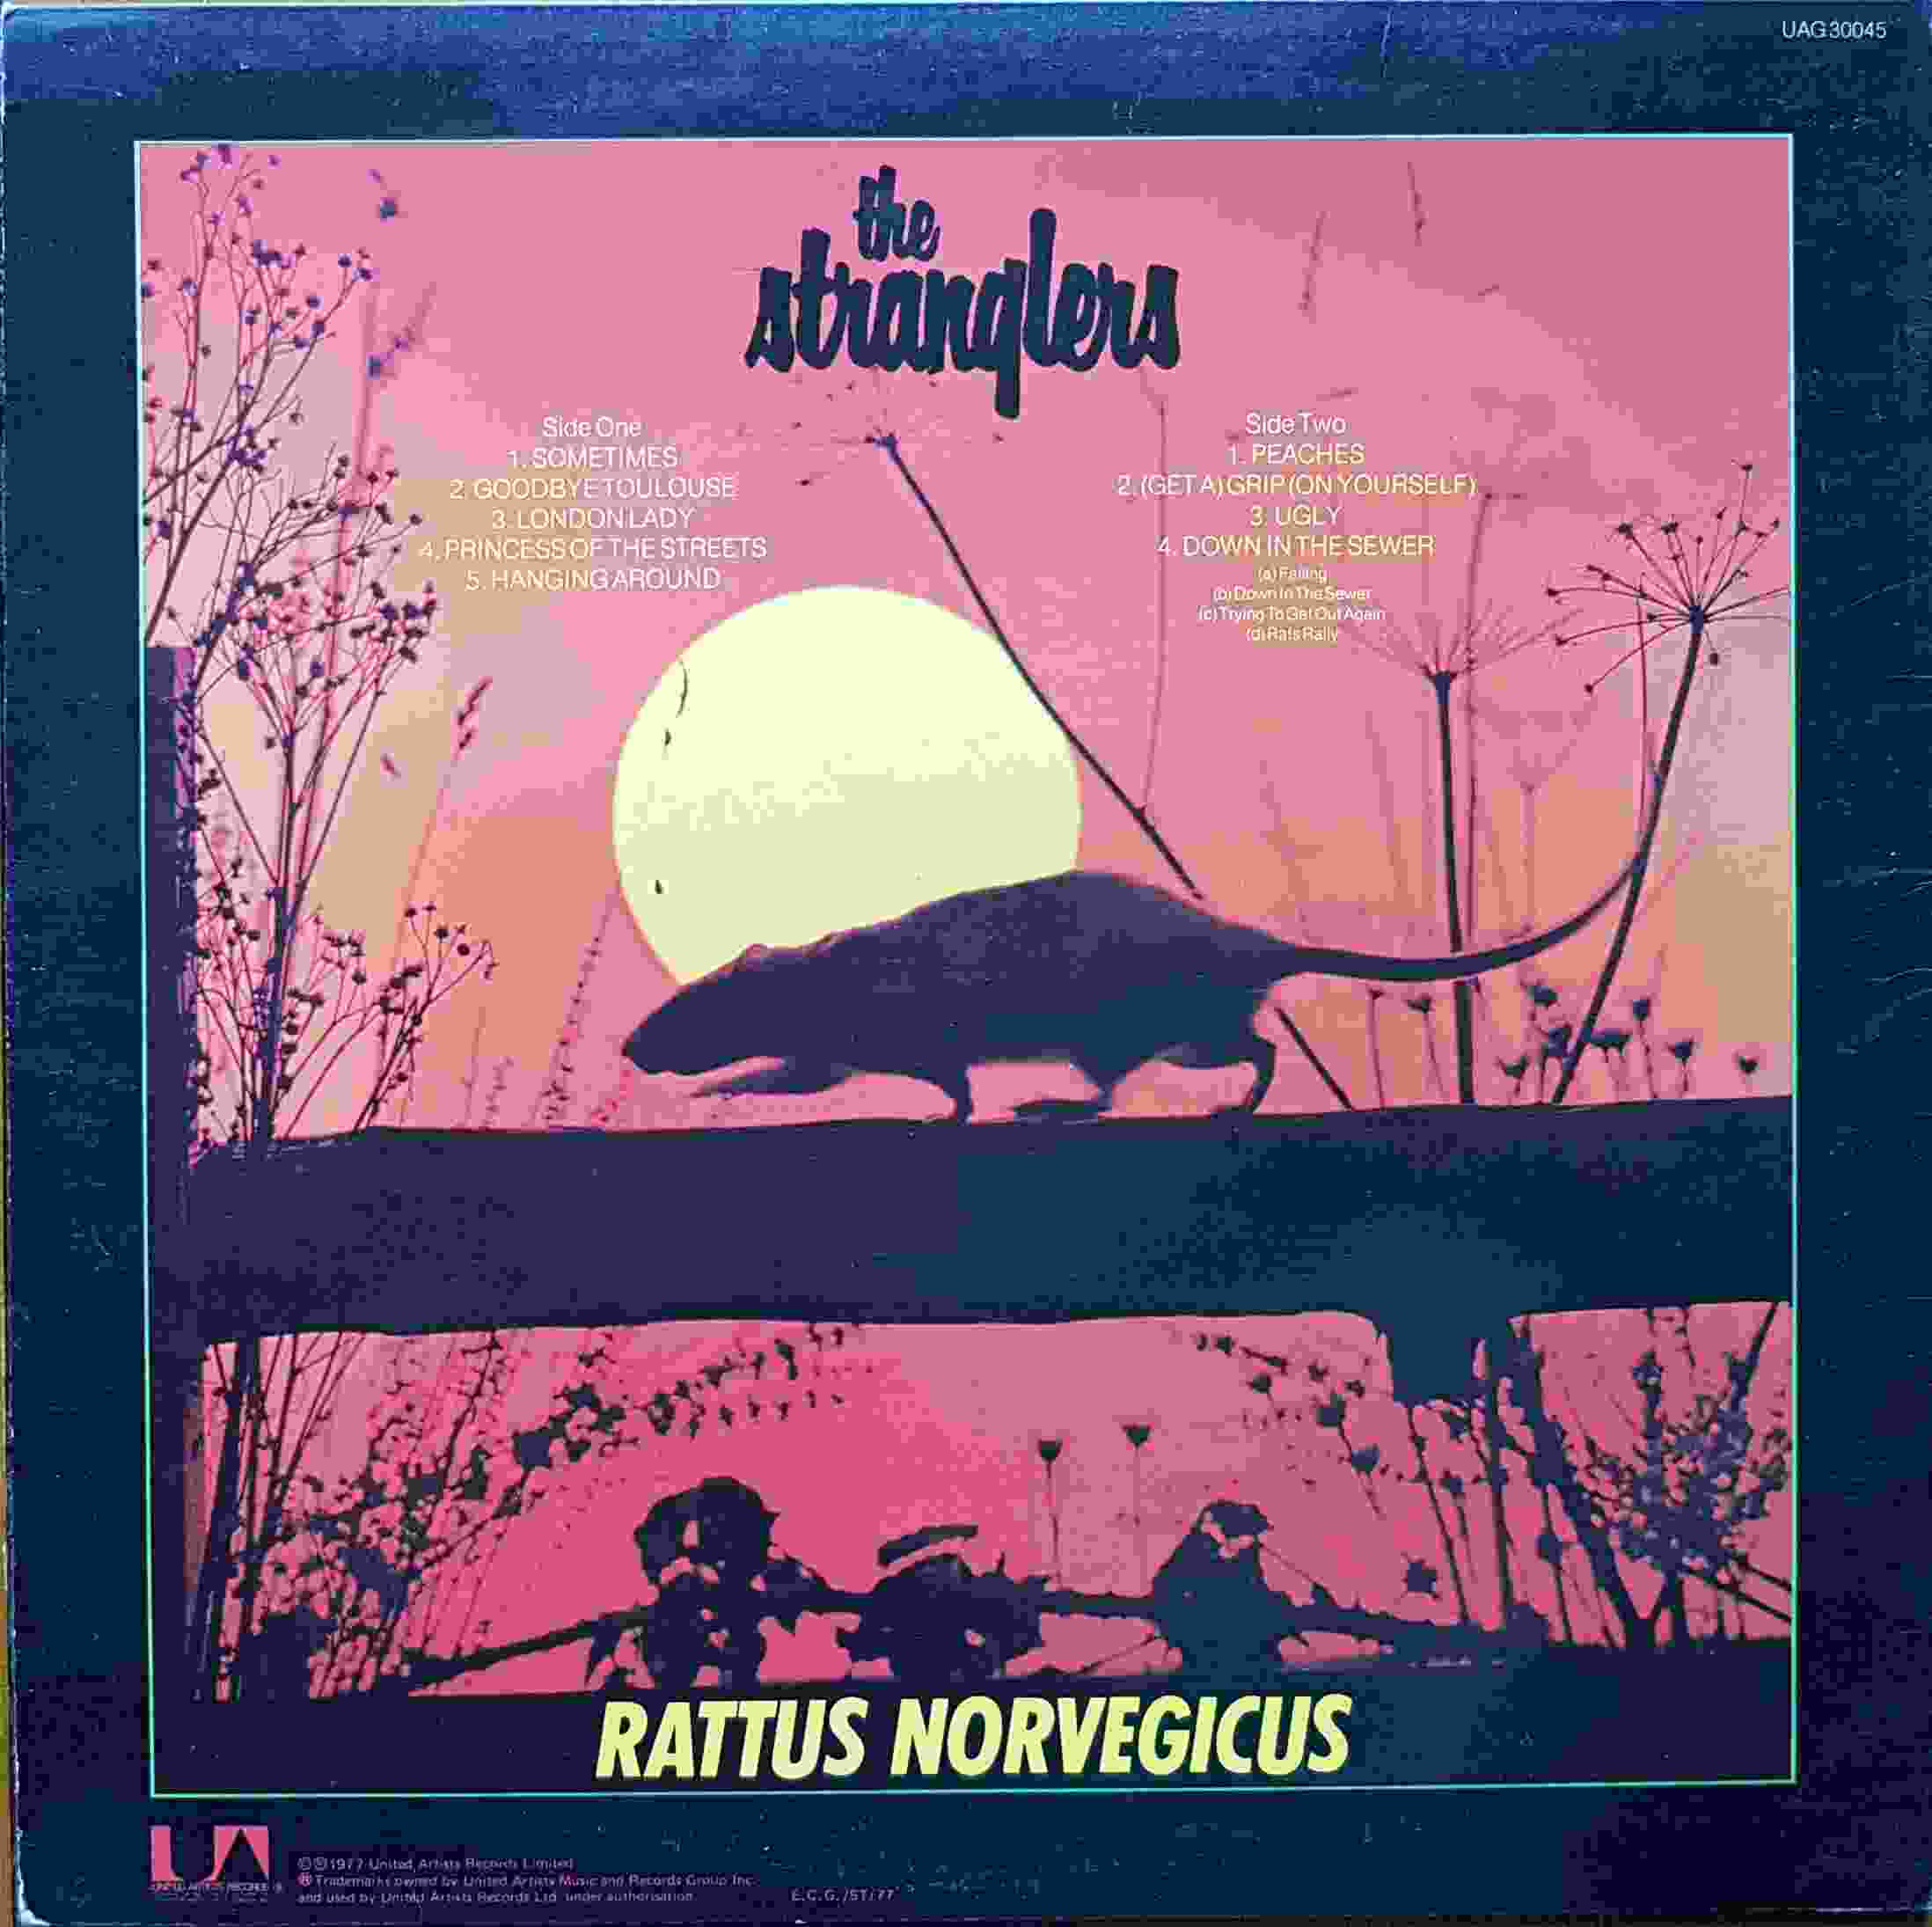 Picture of UAG 30045 Rattus norvegicus by artist The Stranglers  from The Stranglers